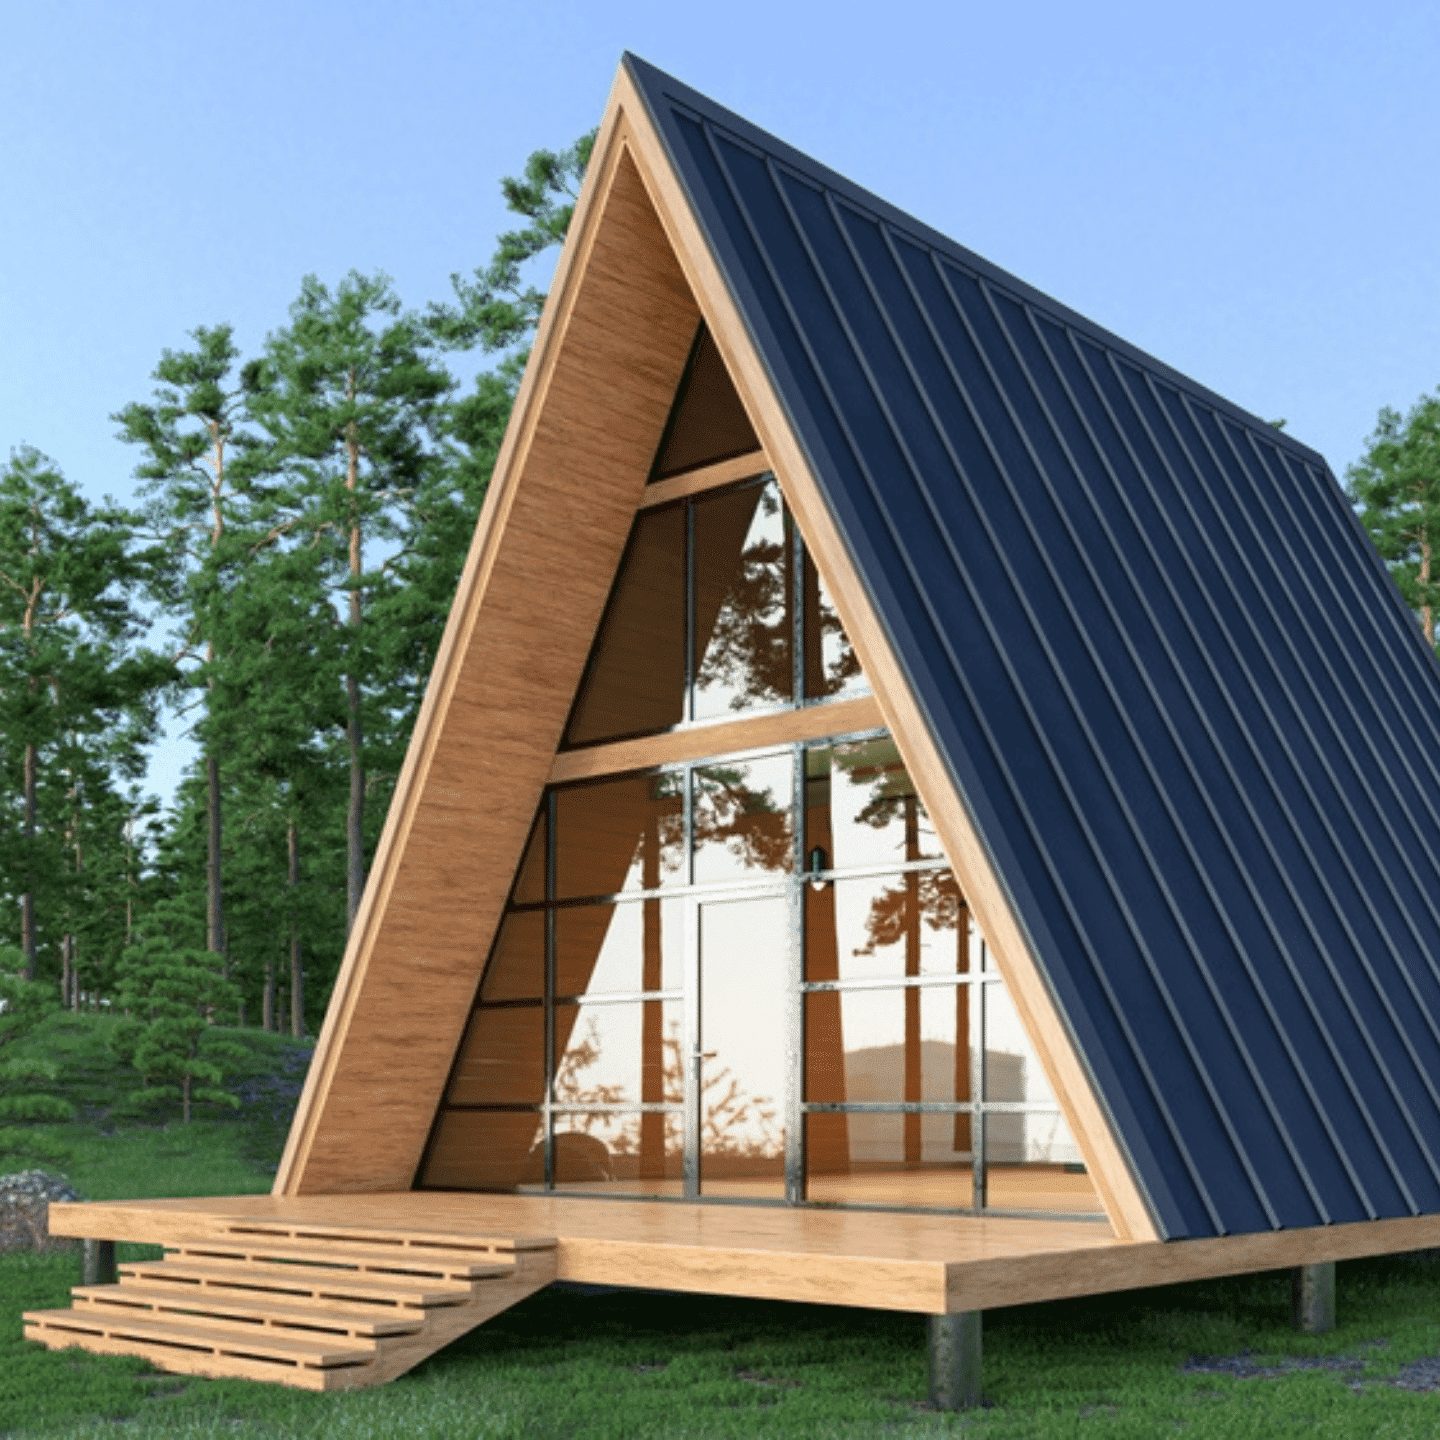 12 Extraordinary Modern Cabin Plans That Will Leave You In Awe